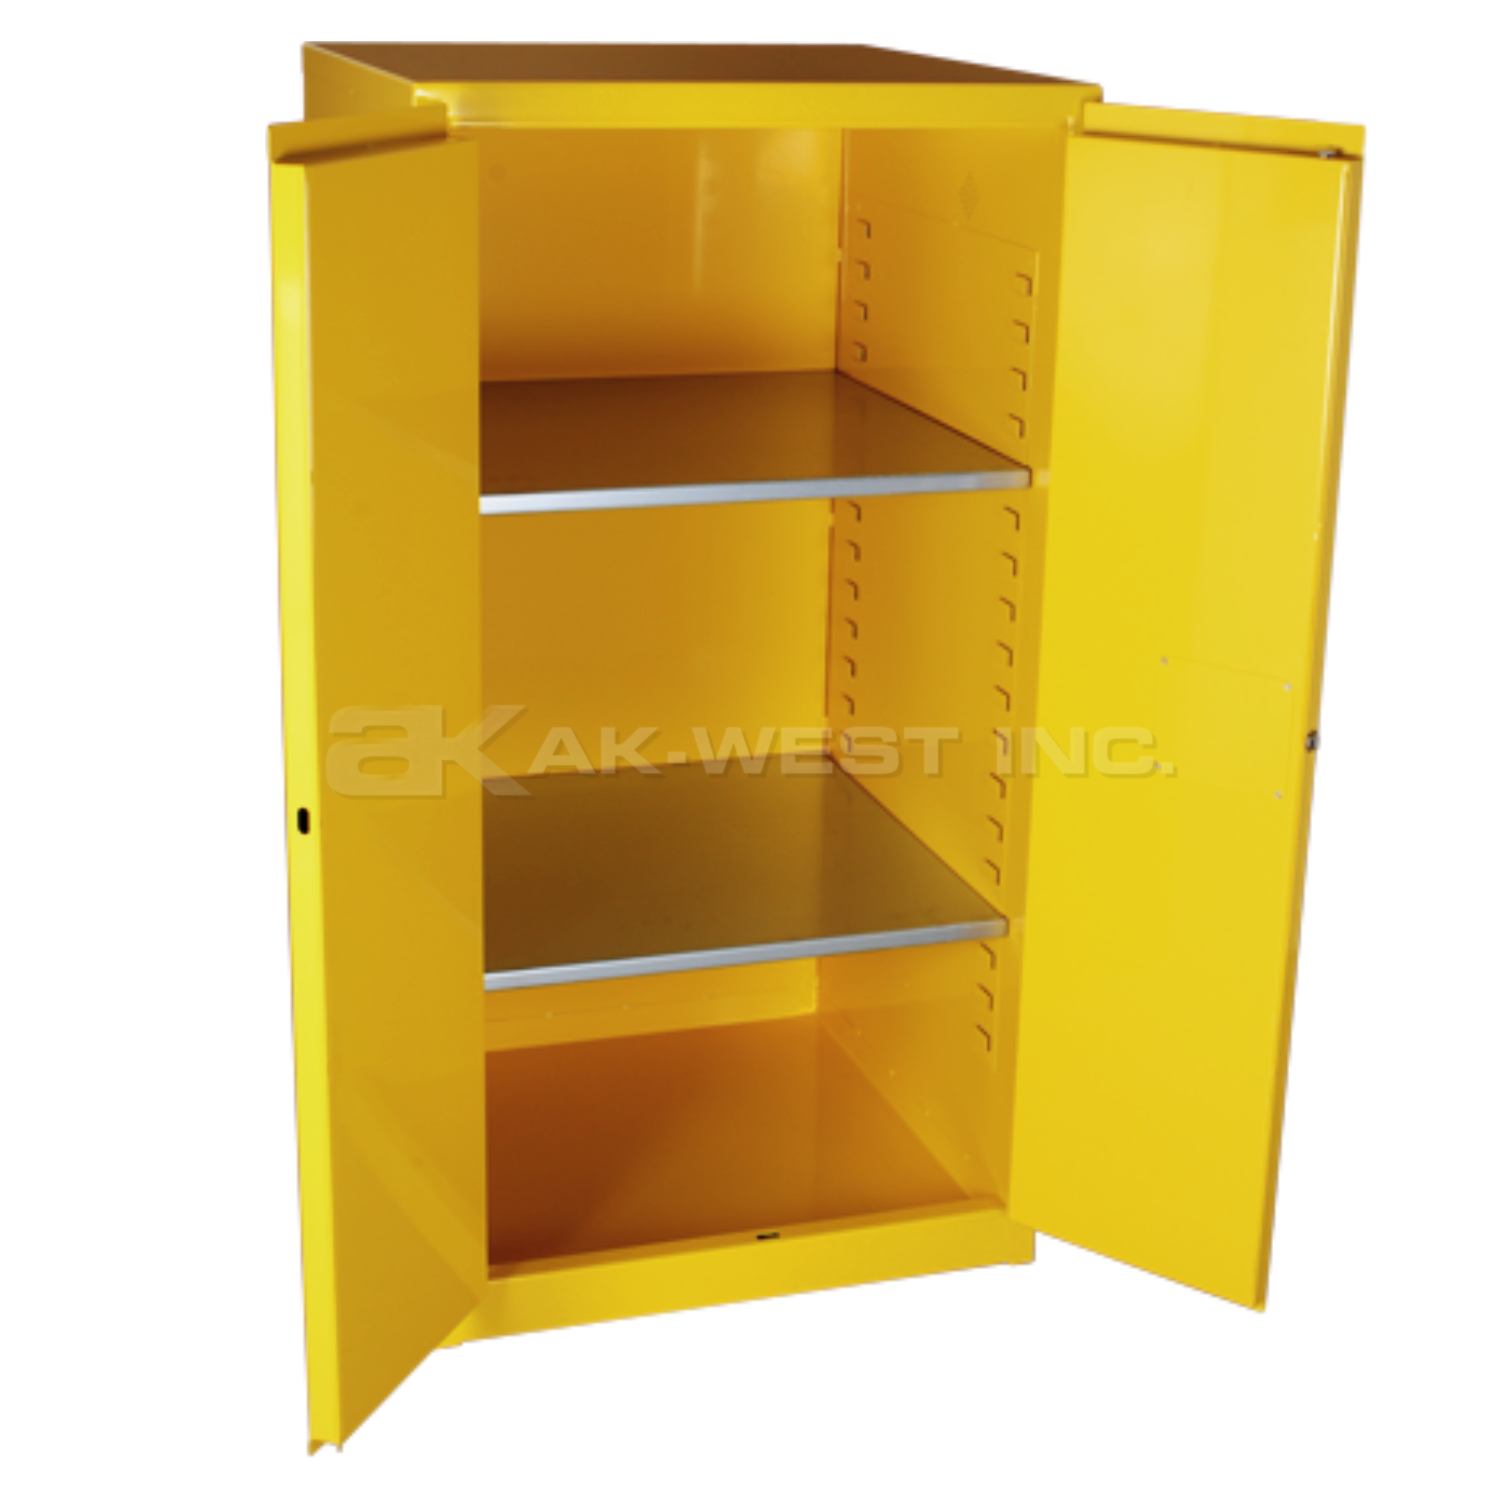 Yellow, 34"L x 34"W x 65"H, 60 Gallon, 2 Door, Manual Close, 2 Shelf, Safety Flammable Cabinet